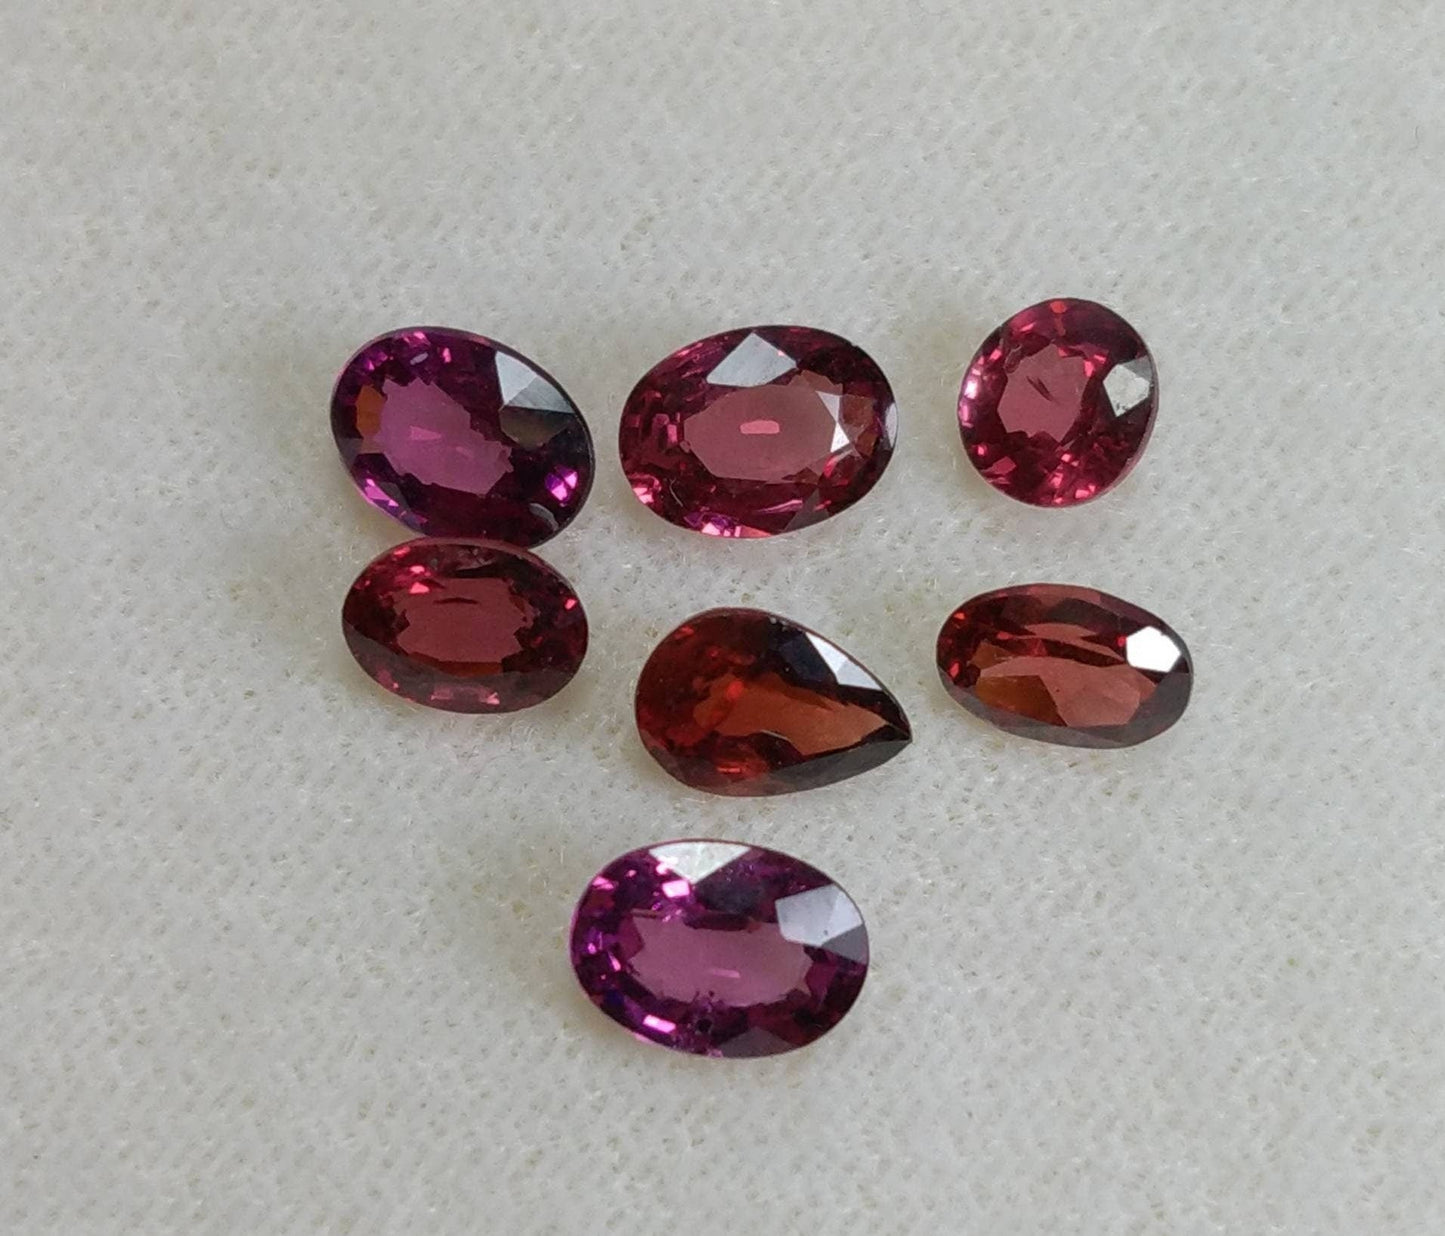 ARSAA GEMS AND MINERALSNatural top quality beautiful 5.5 carat small lot of faceted oval shapes rhodolite garnet gems - Premium  from ARSAA GEMS AND MINERALS - Just $35.00! Shop now at ARSAA GEMS AND MINERALS